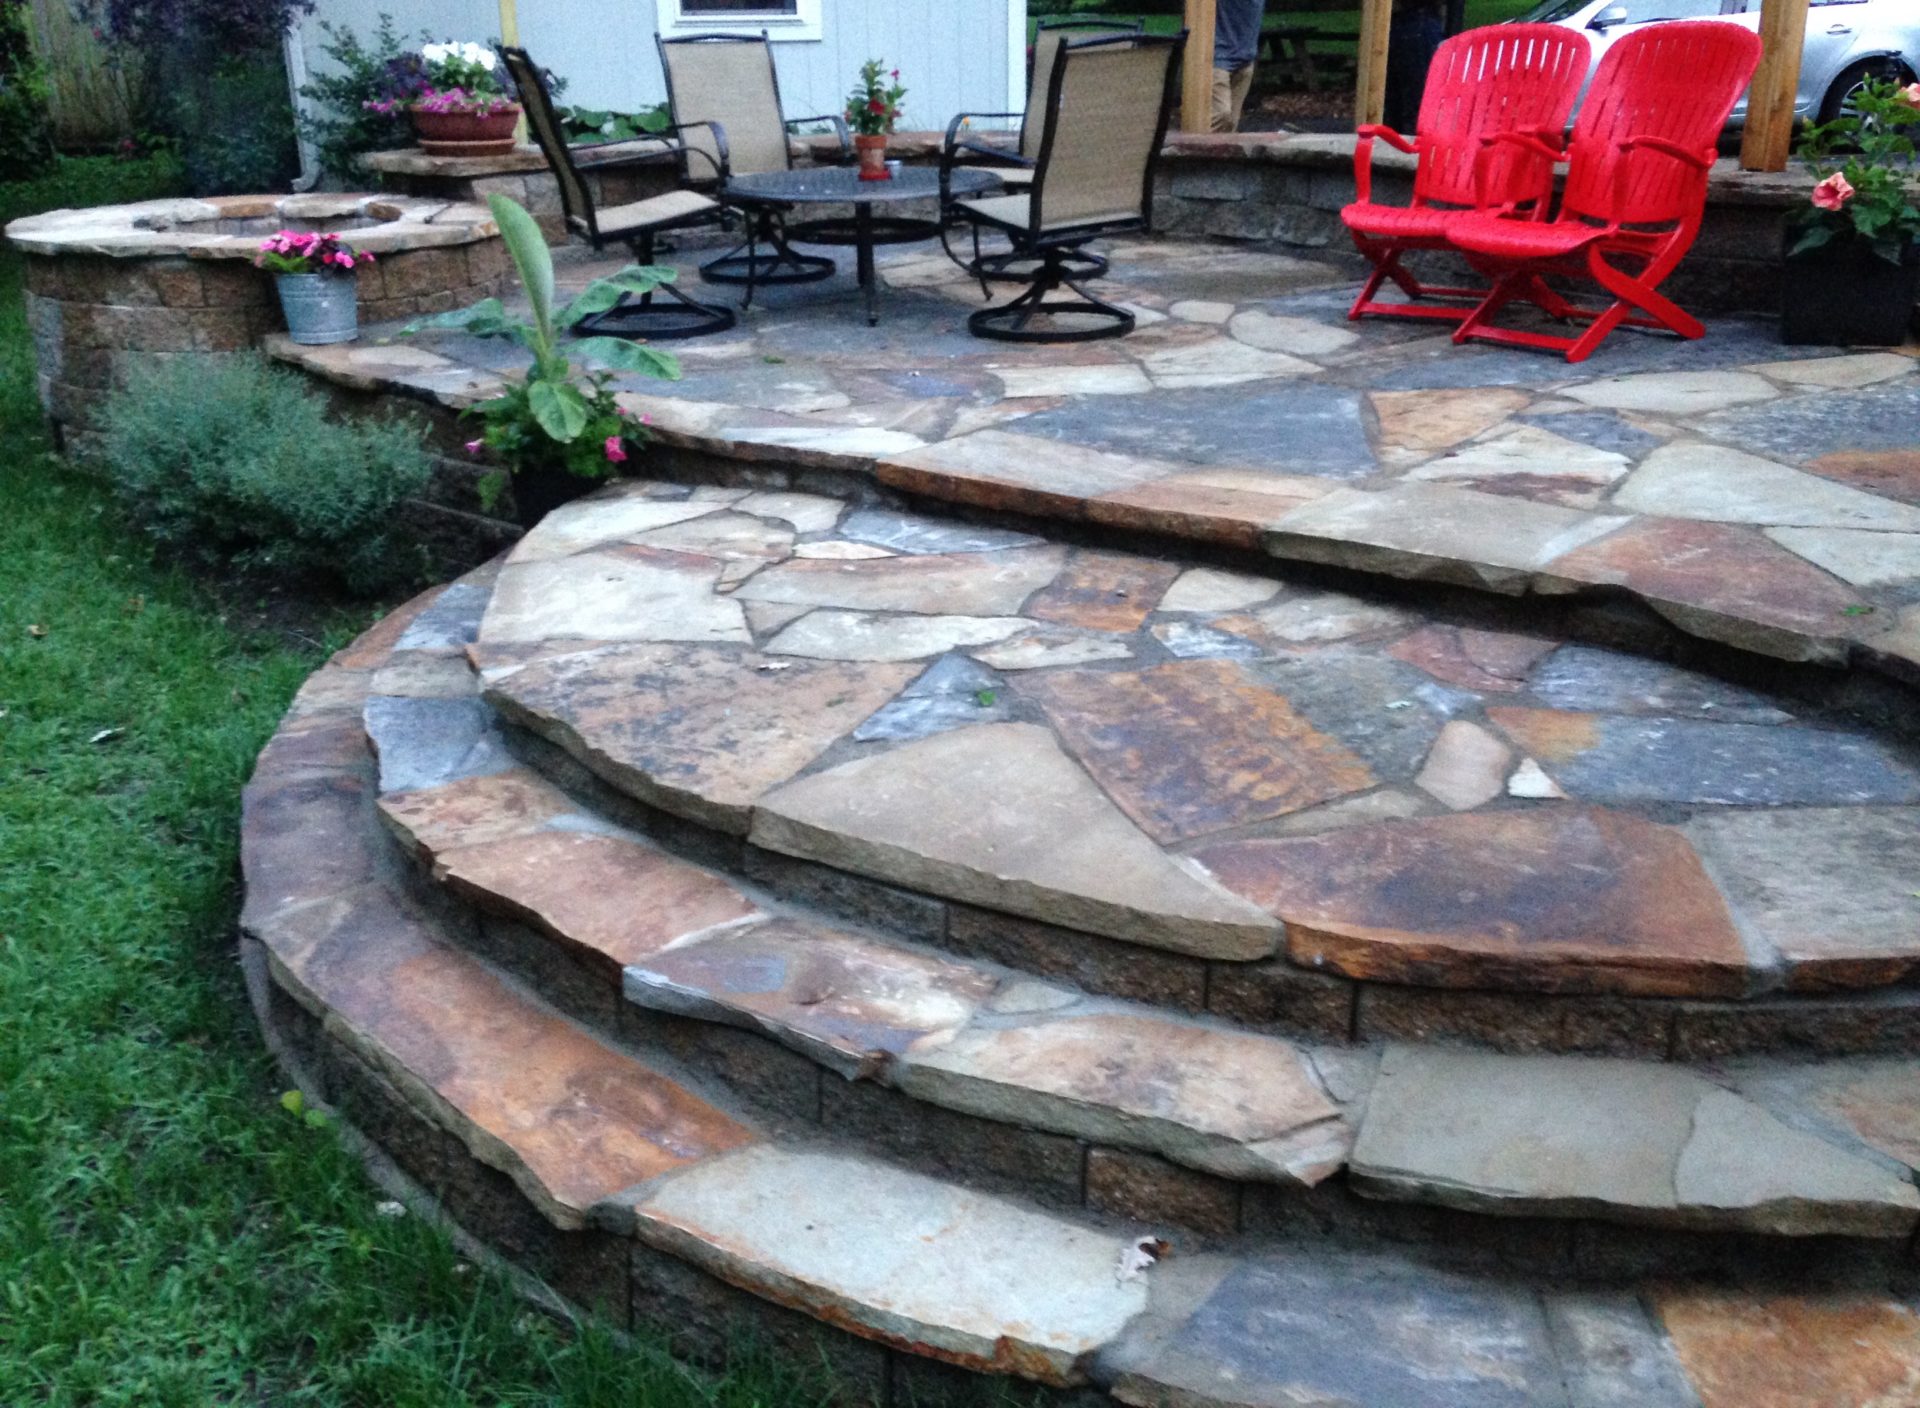 A patio and steps made up of colorful paver stones.